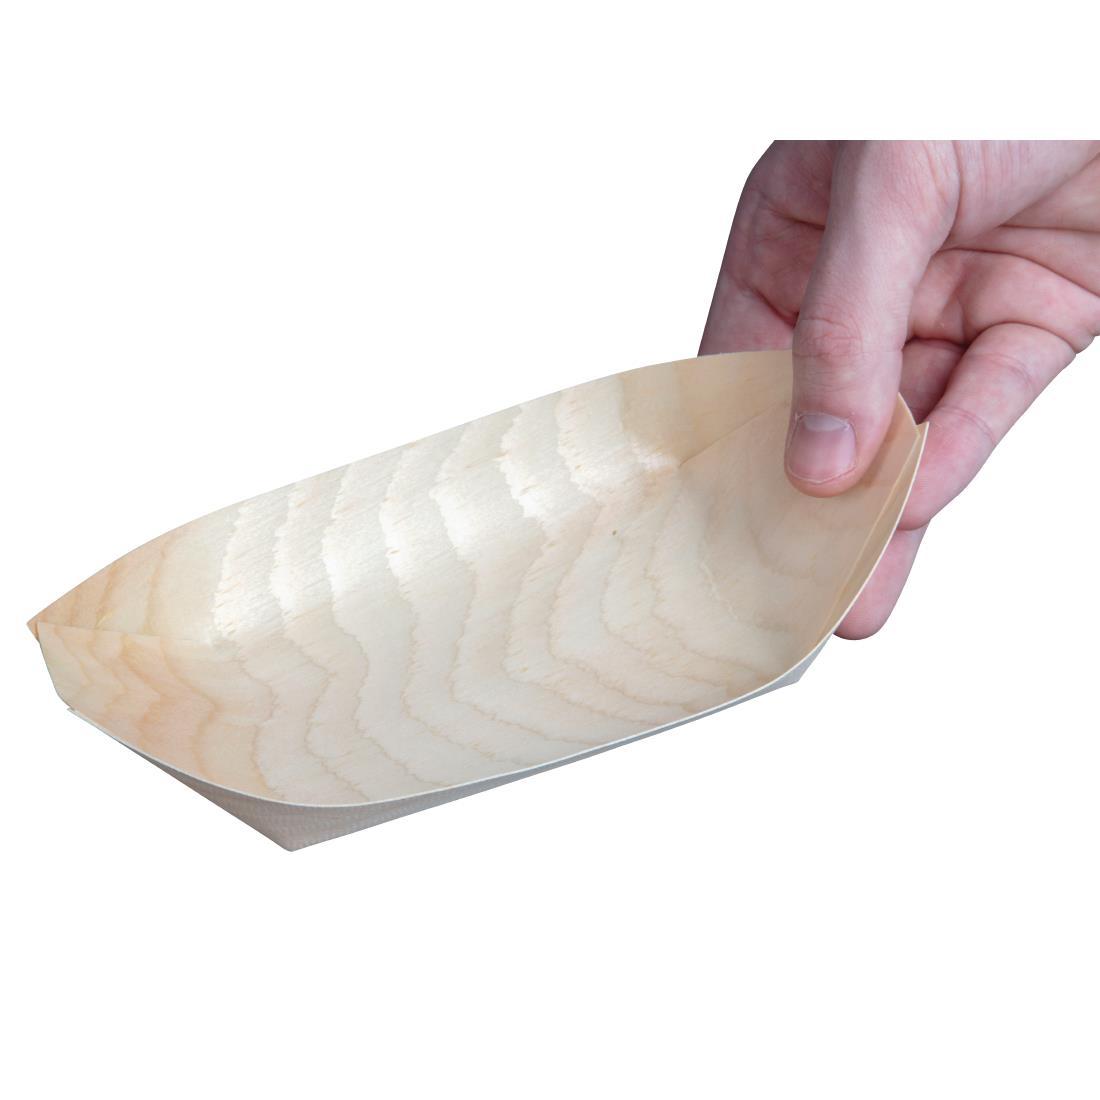 Fiesta Compostable Wooden Sushi Boats Medium 190mm (Pack of 100) - DK387  - 4